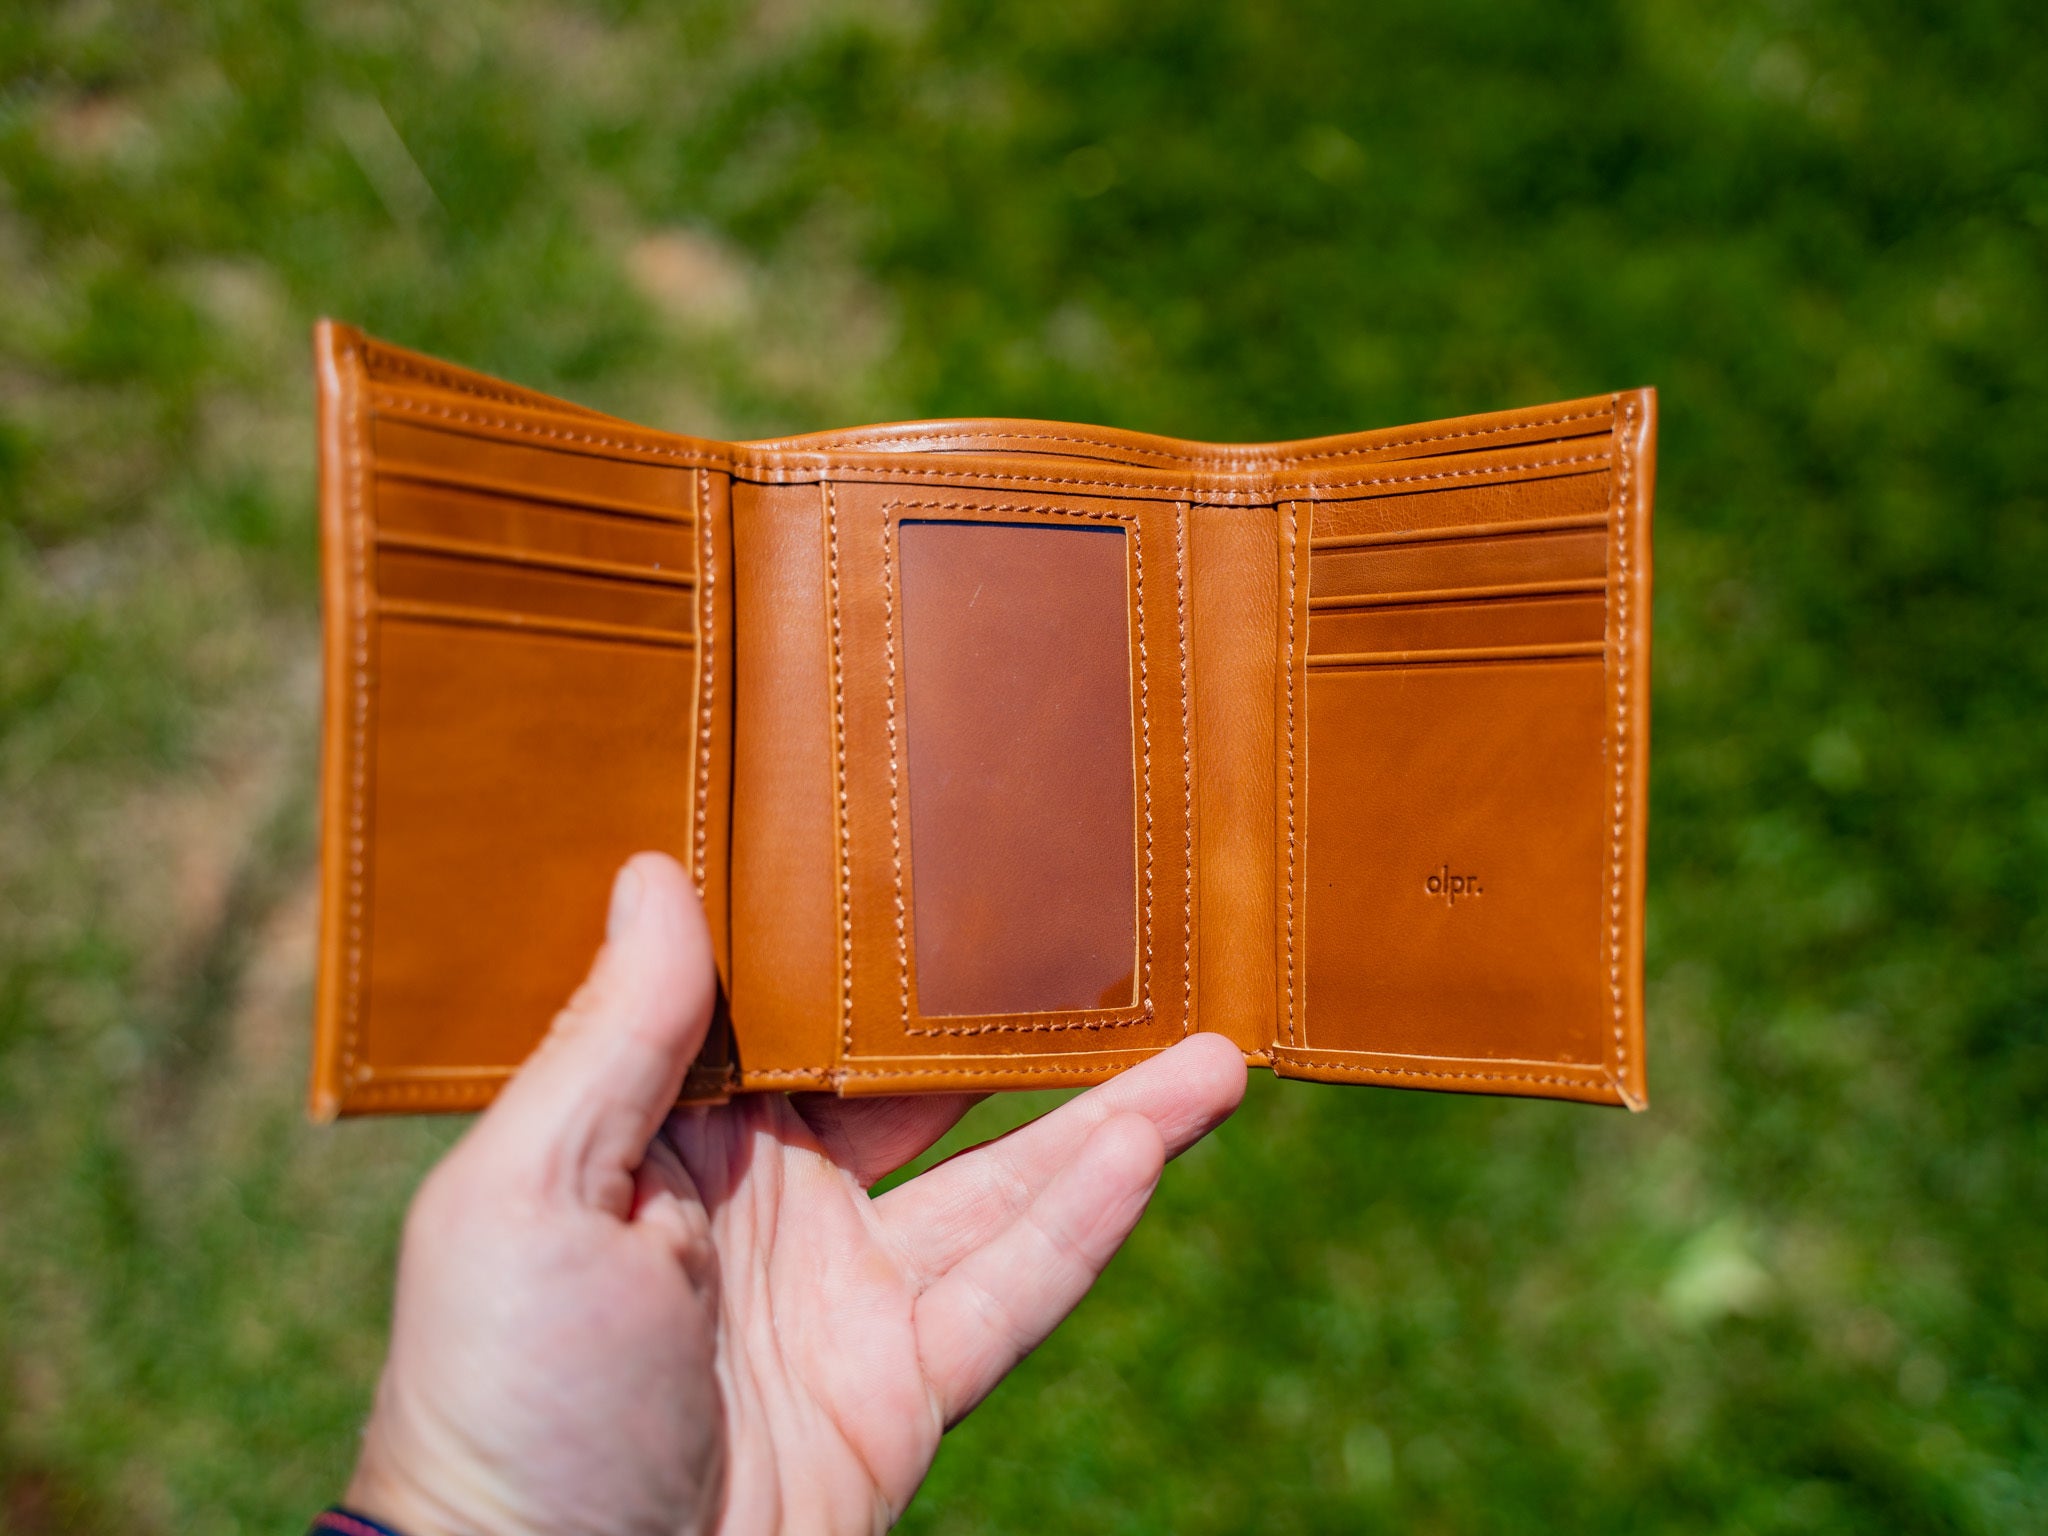 Brown Premium Leather Trifold Wallet with ID Window